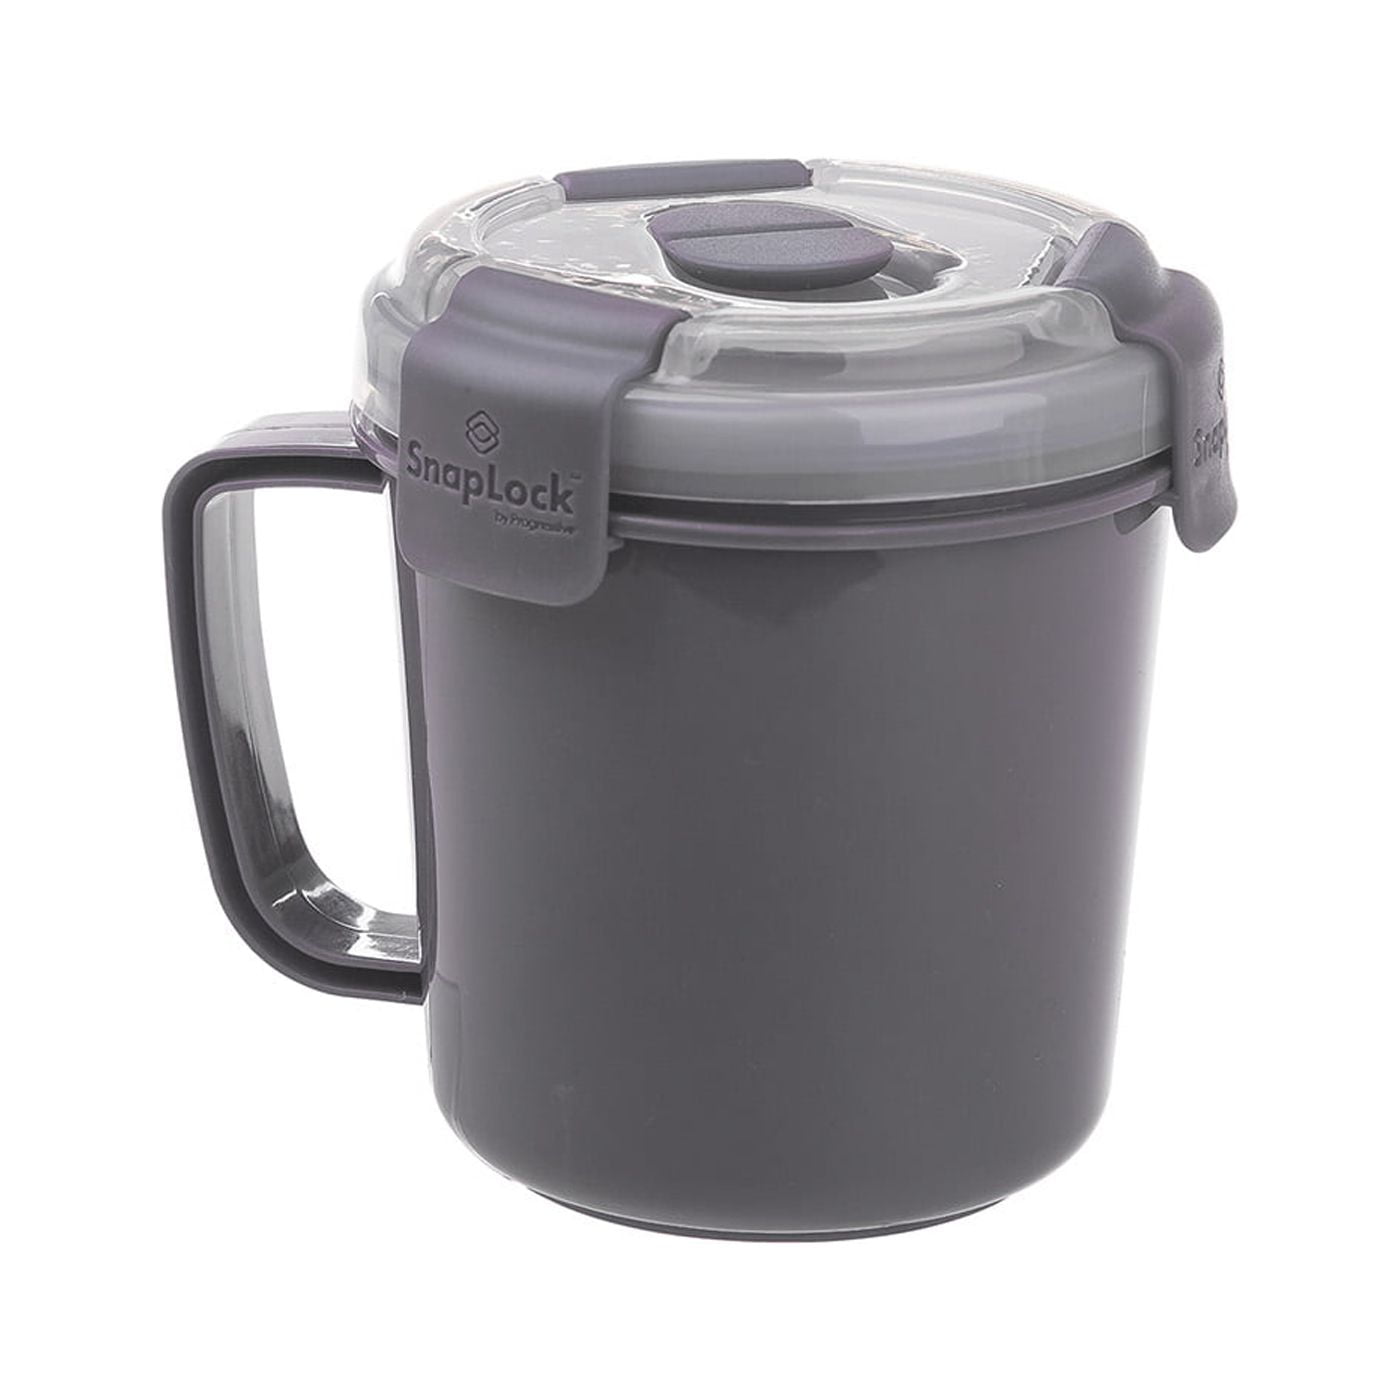 Soup or Sides” 1-Gallon Soup Container #2783